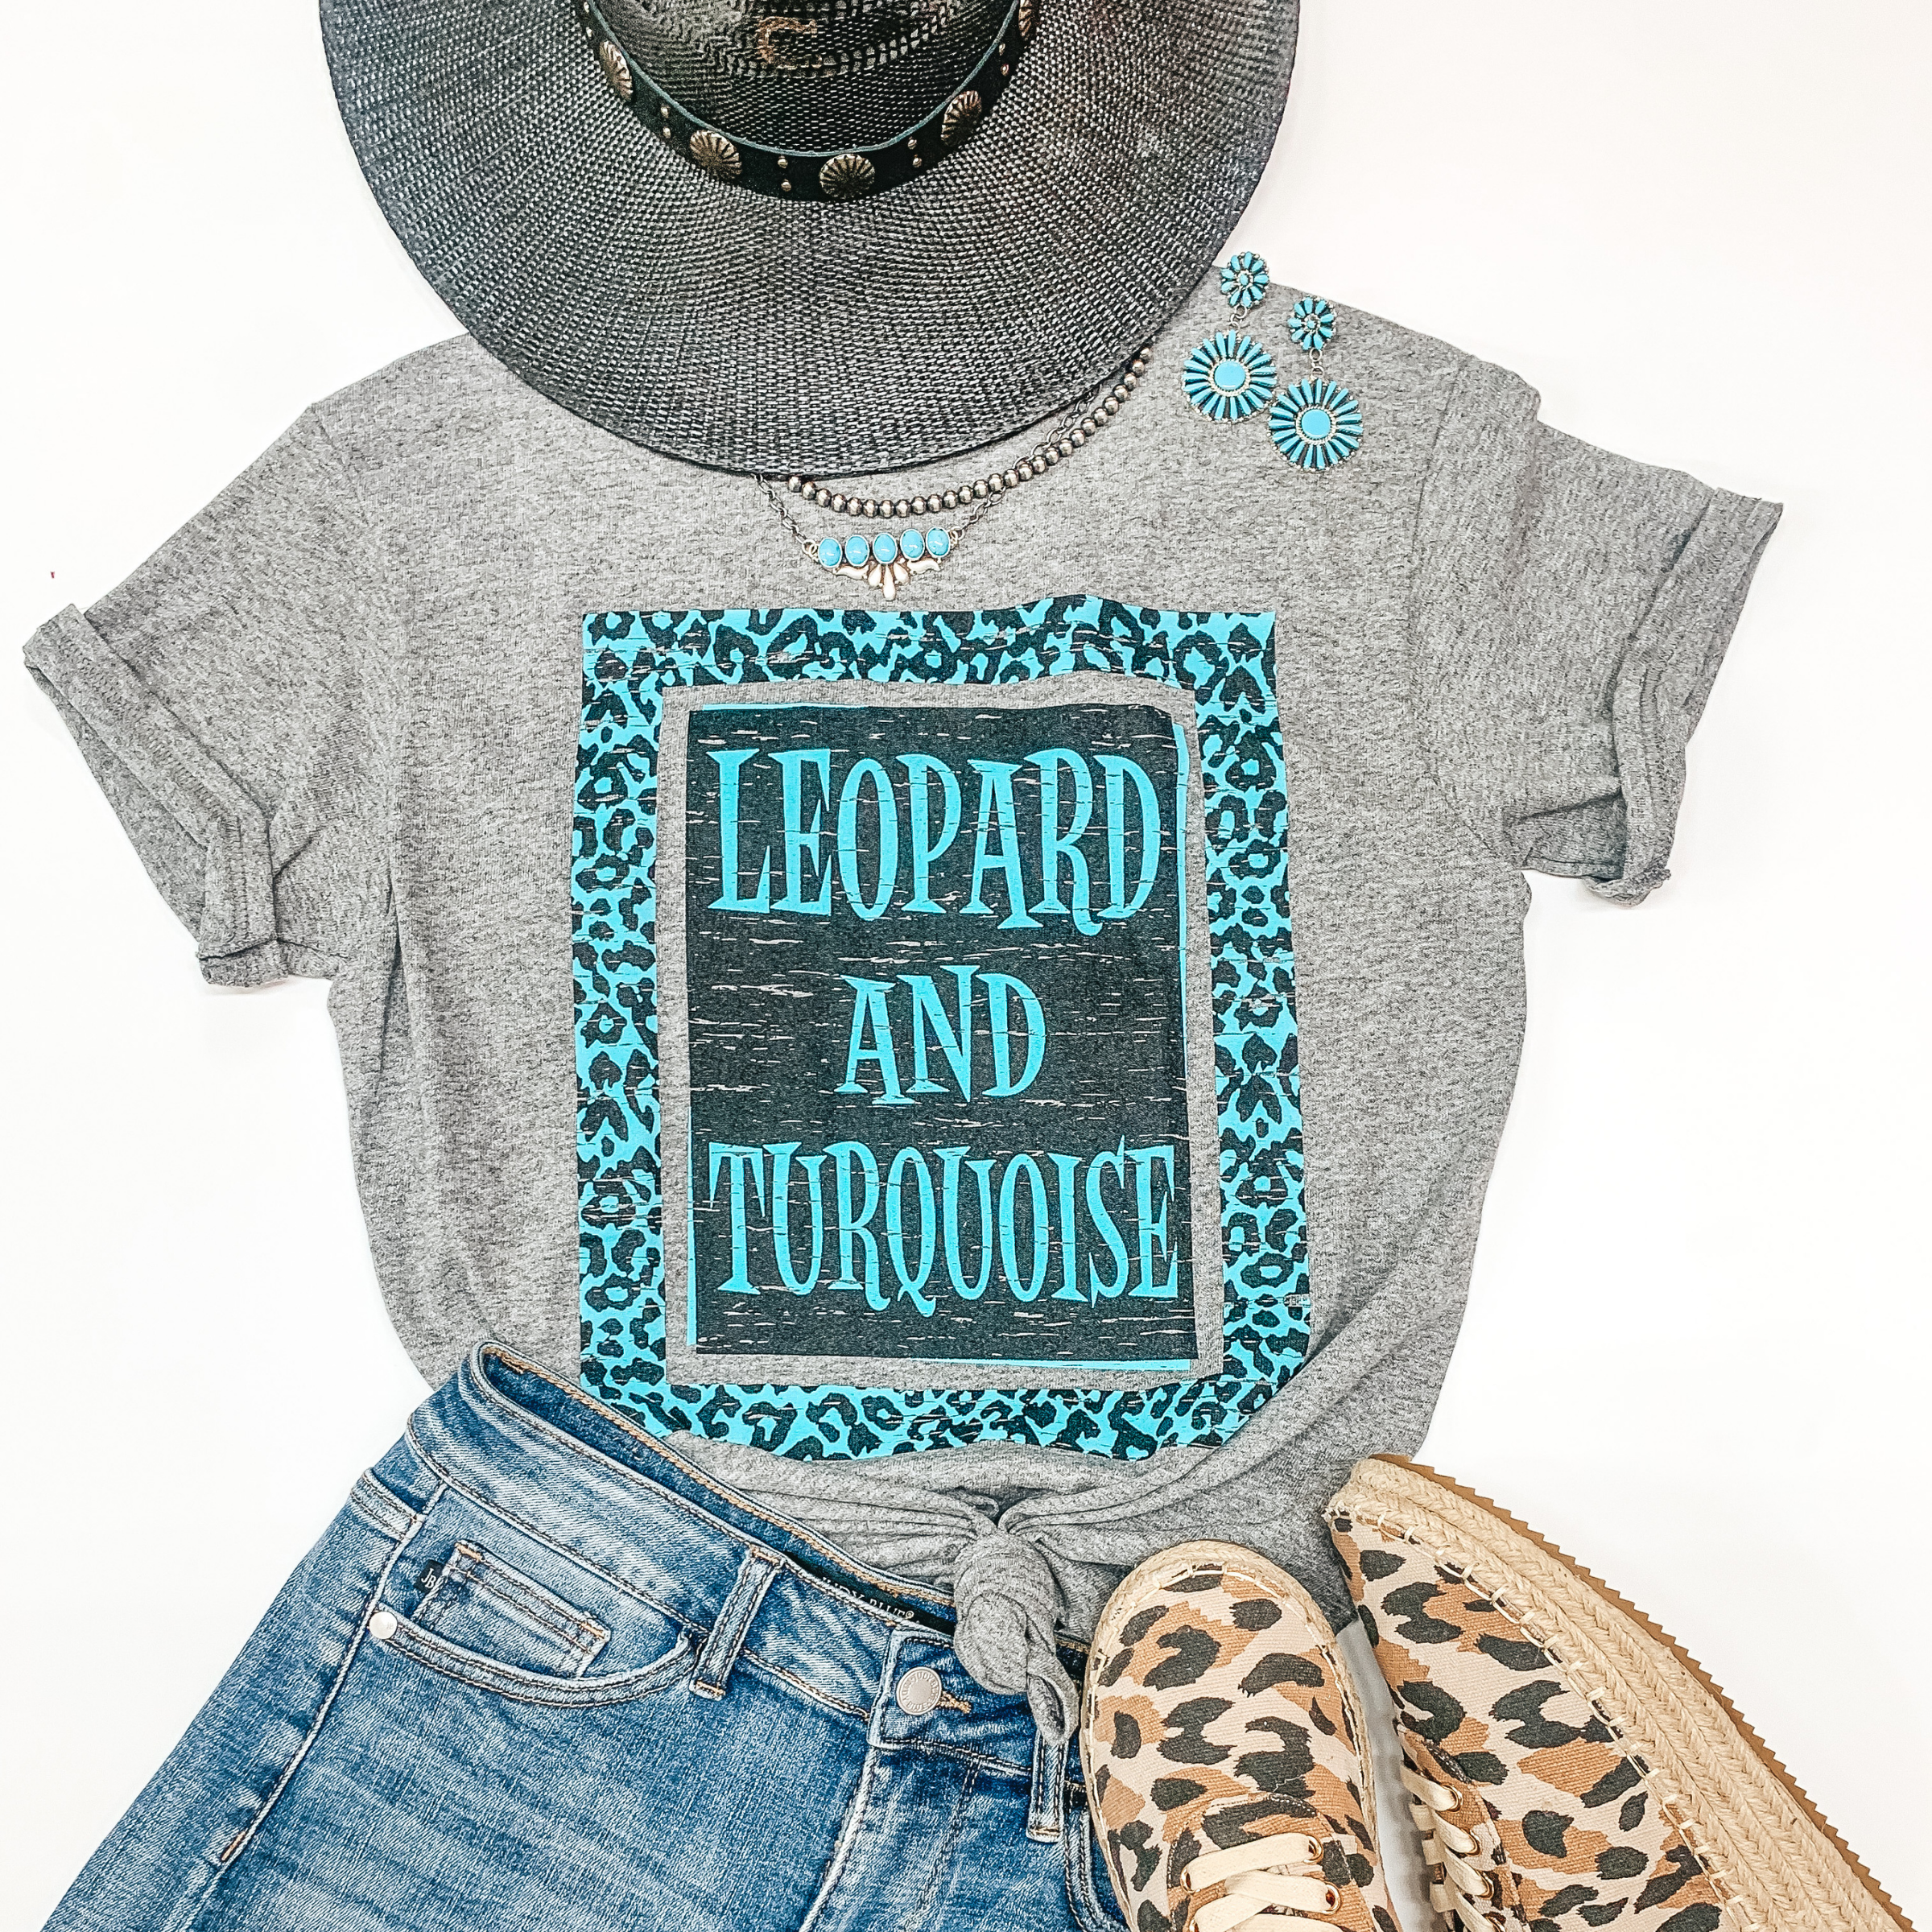 Last Chance Size Small & Med. | Leopard and Turquoise Short Sleeve Graphic Tee in Heather Grey